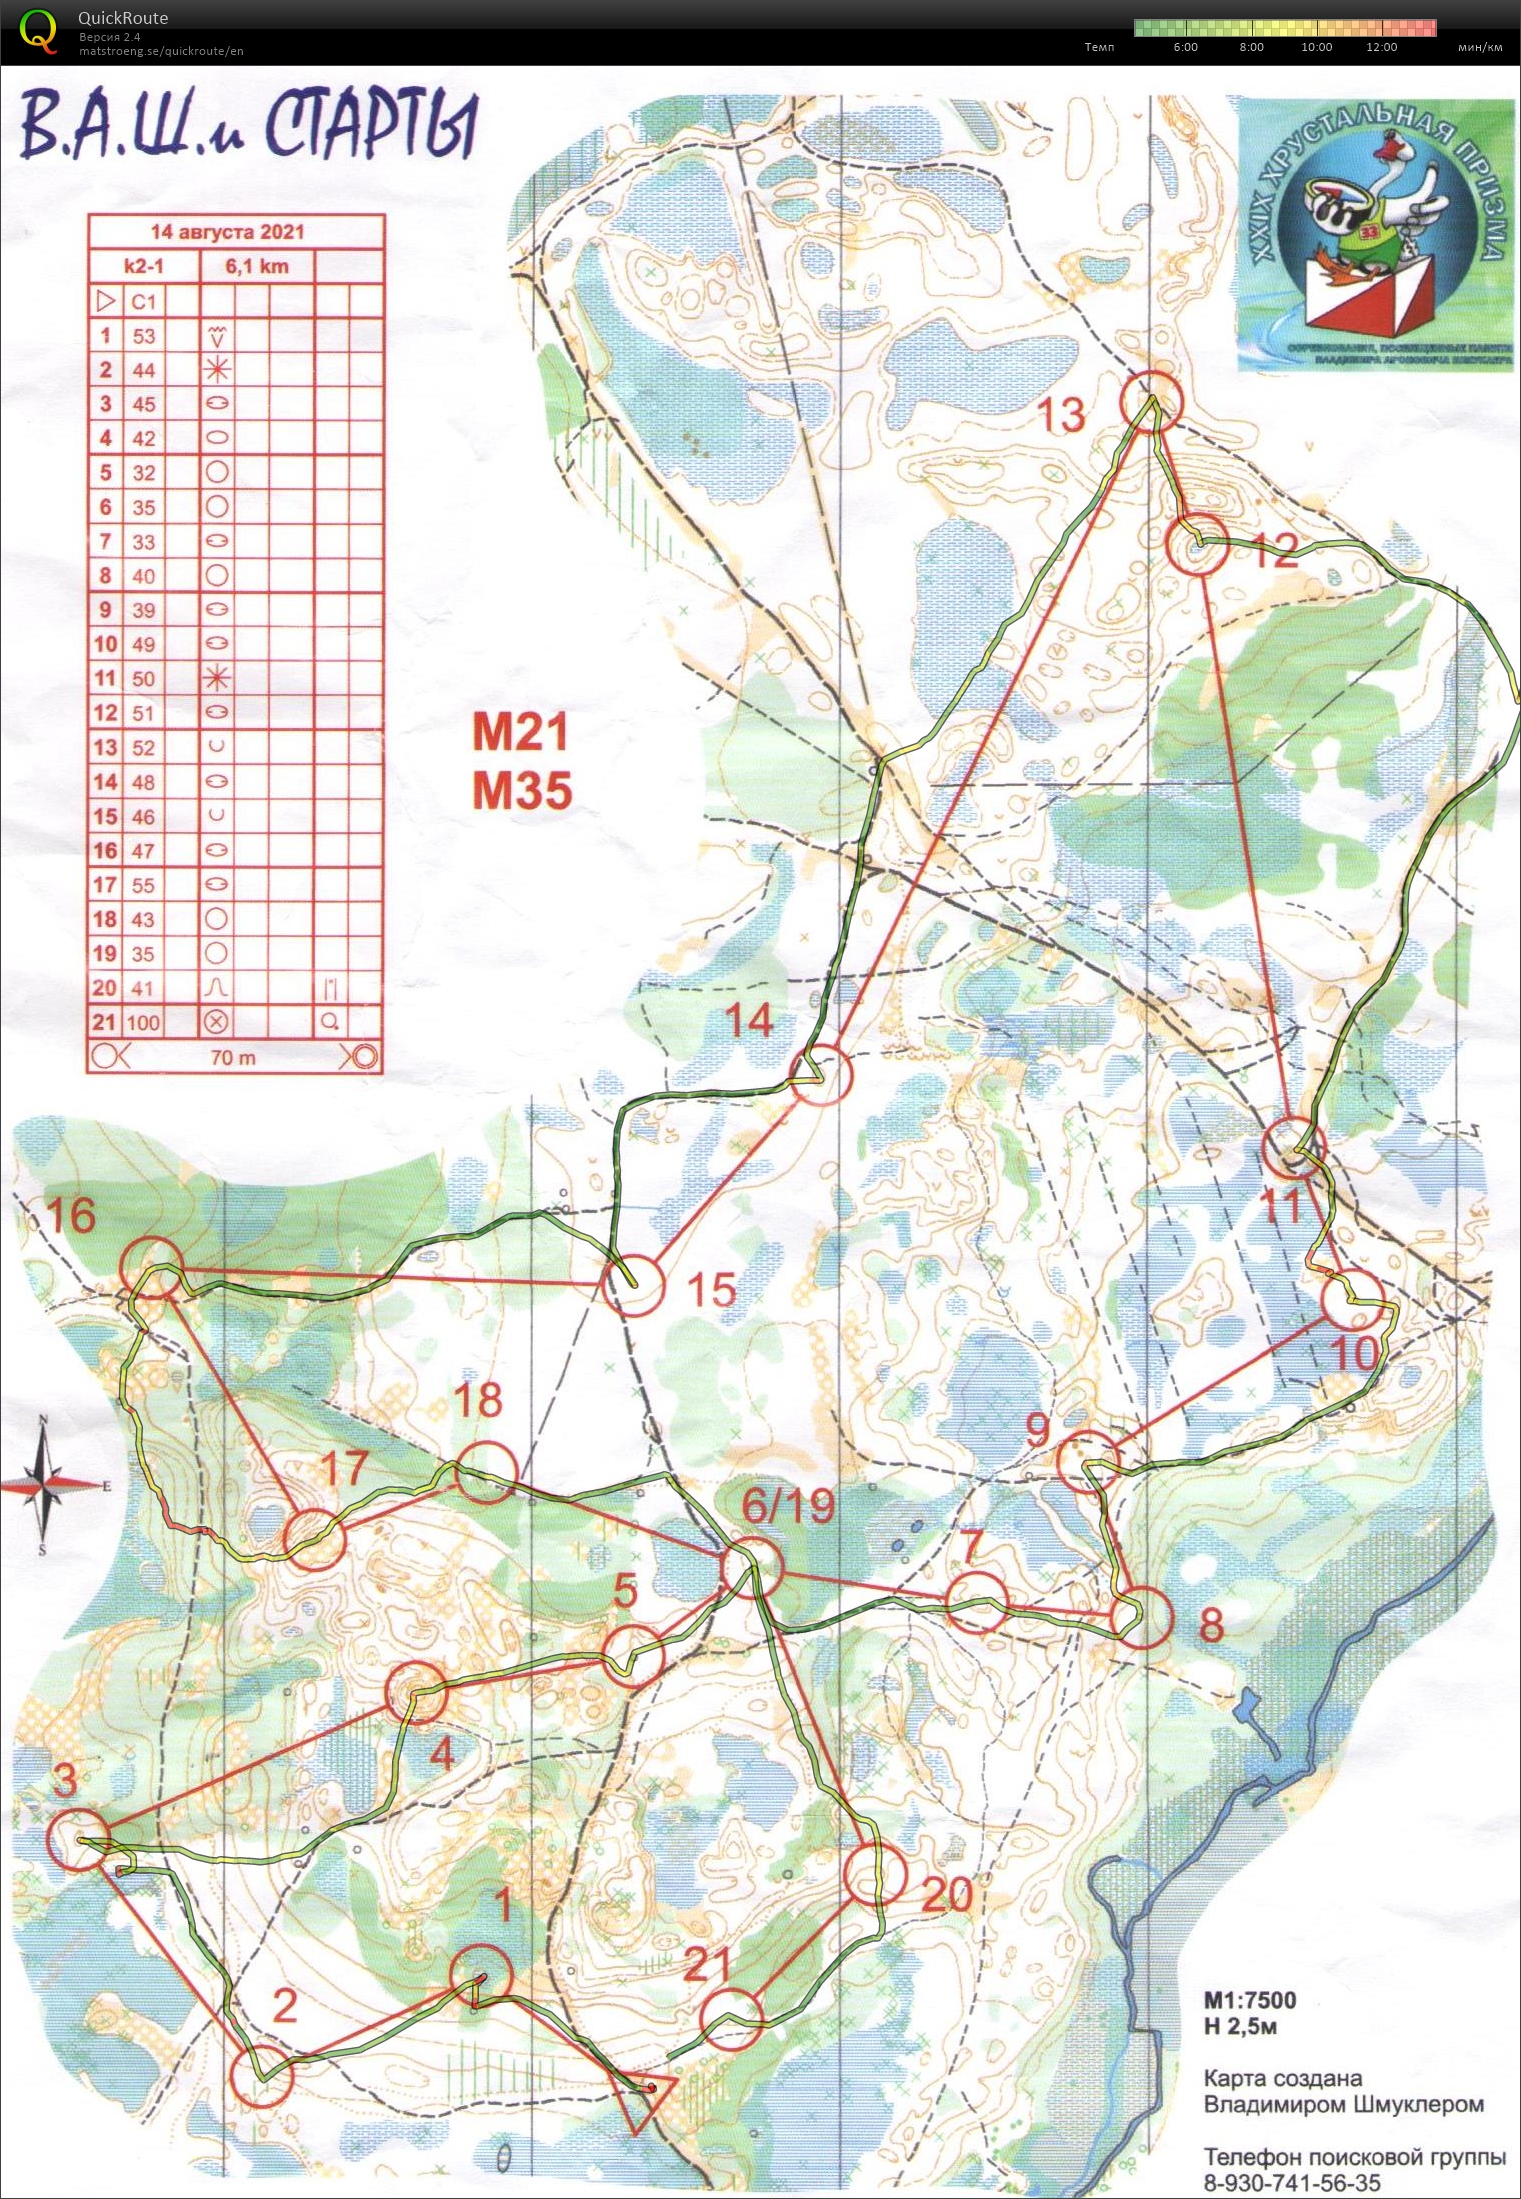 Map with track - Хрустальная призма 2021 (классика 2), area - Окатово, from orienteering map archive of Глеб Грибанов